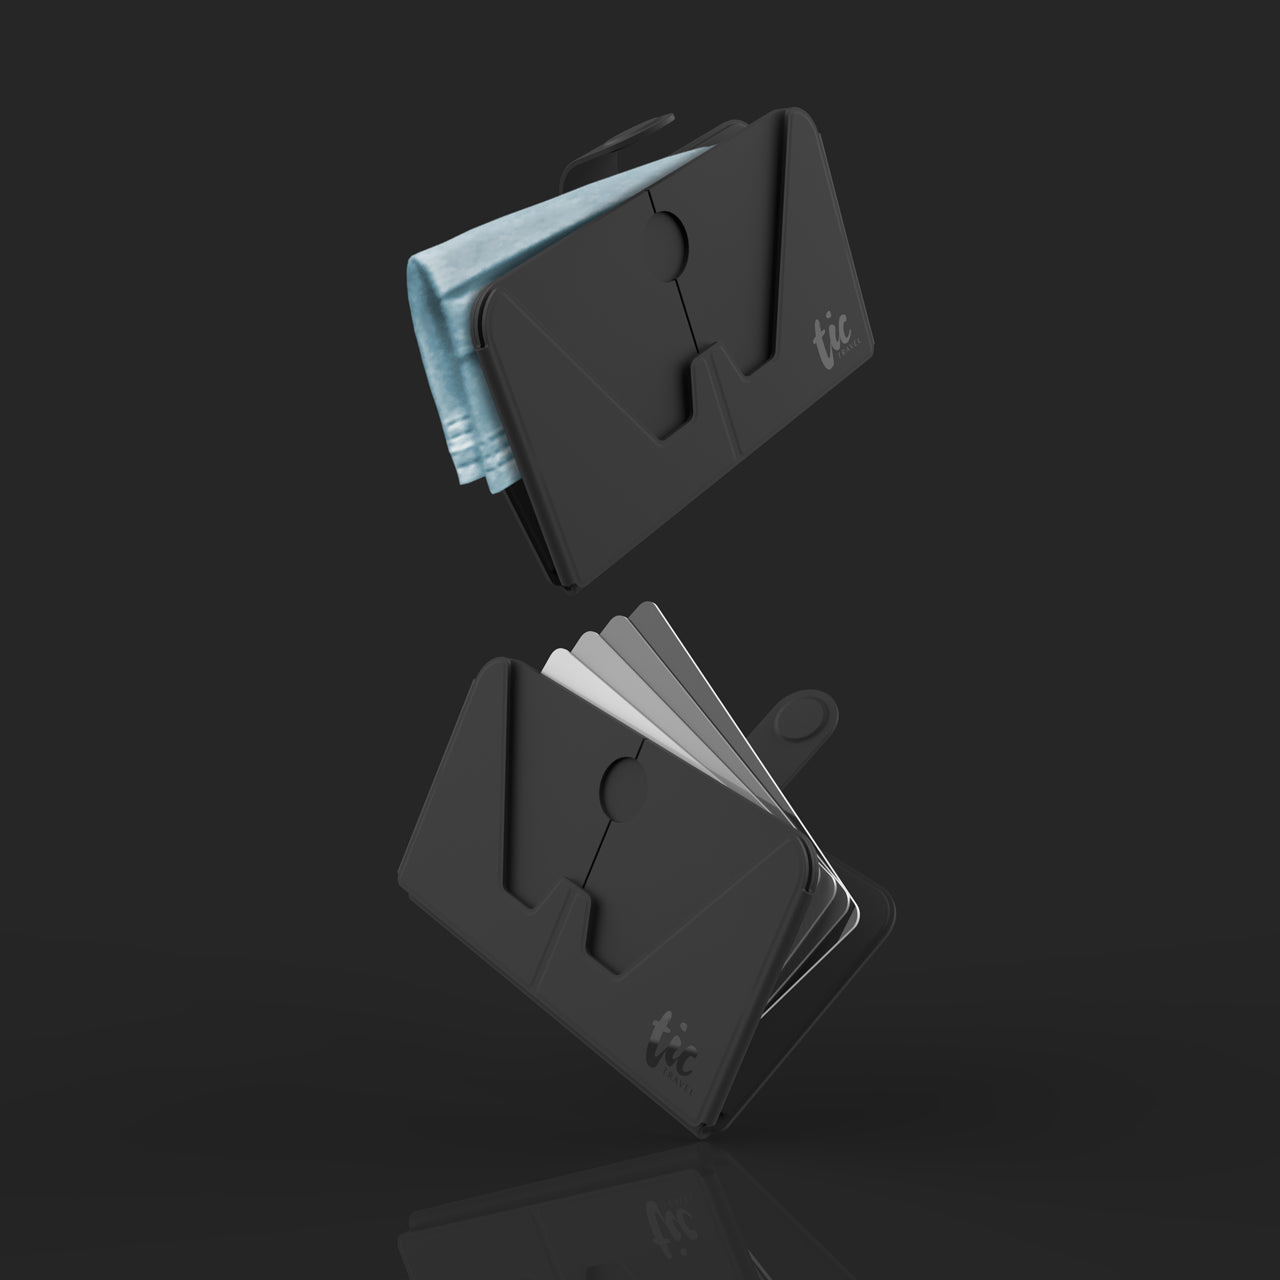 Tic Holder - Card-sized foldable holder for Phone / Mask - Storming Gravity